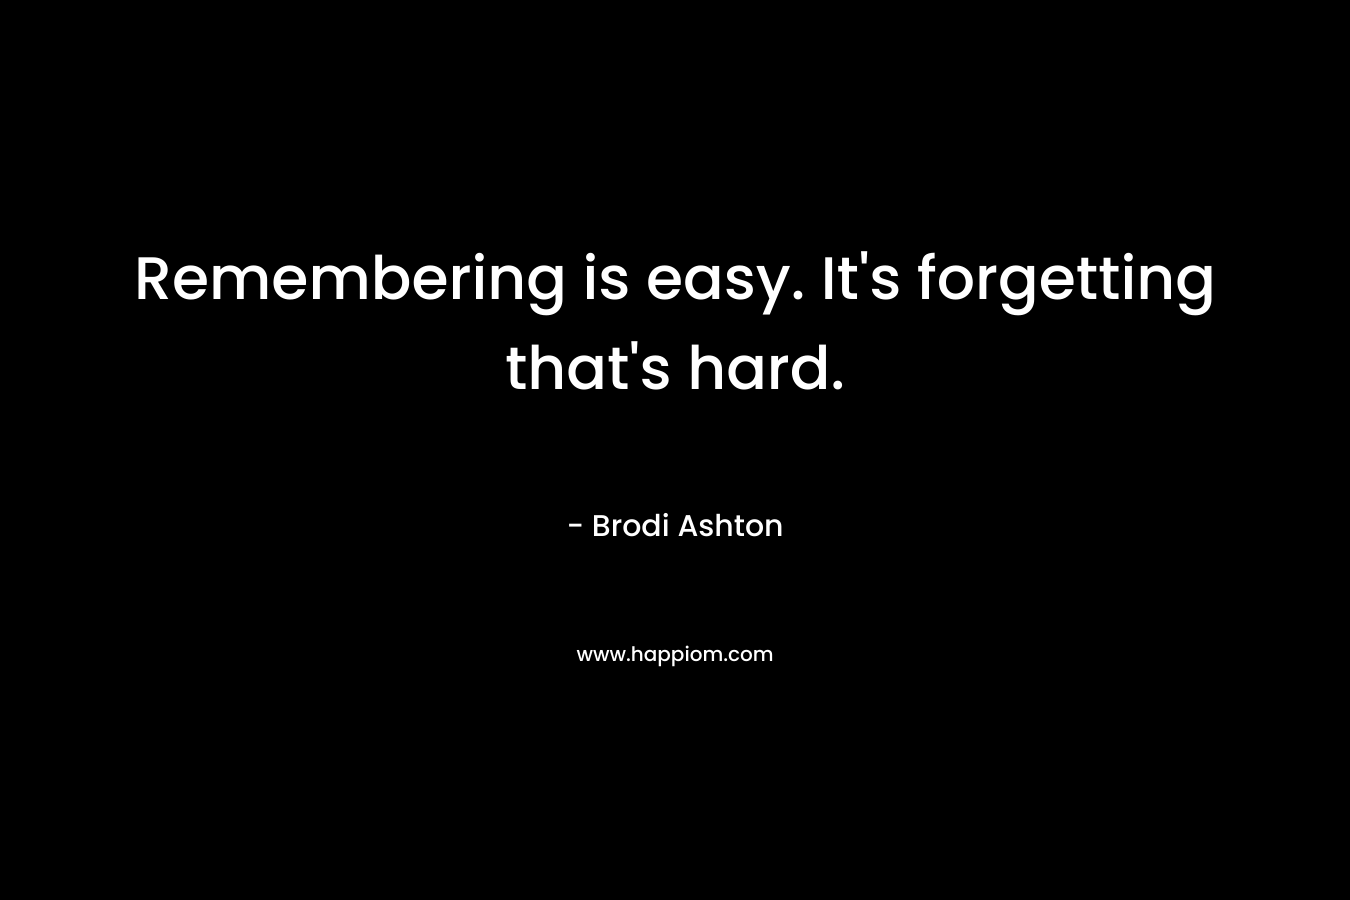 Remembering is easy. It's forgetting that's hard.